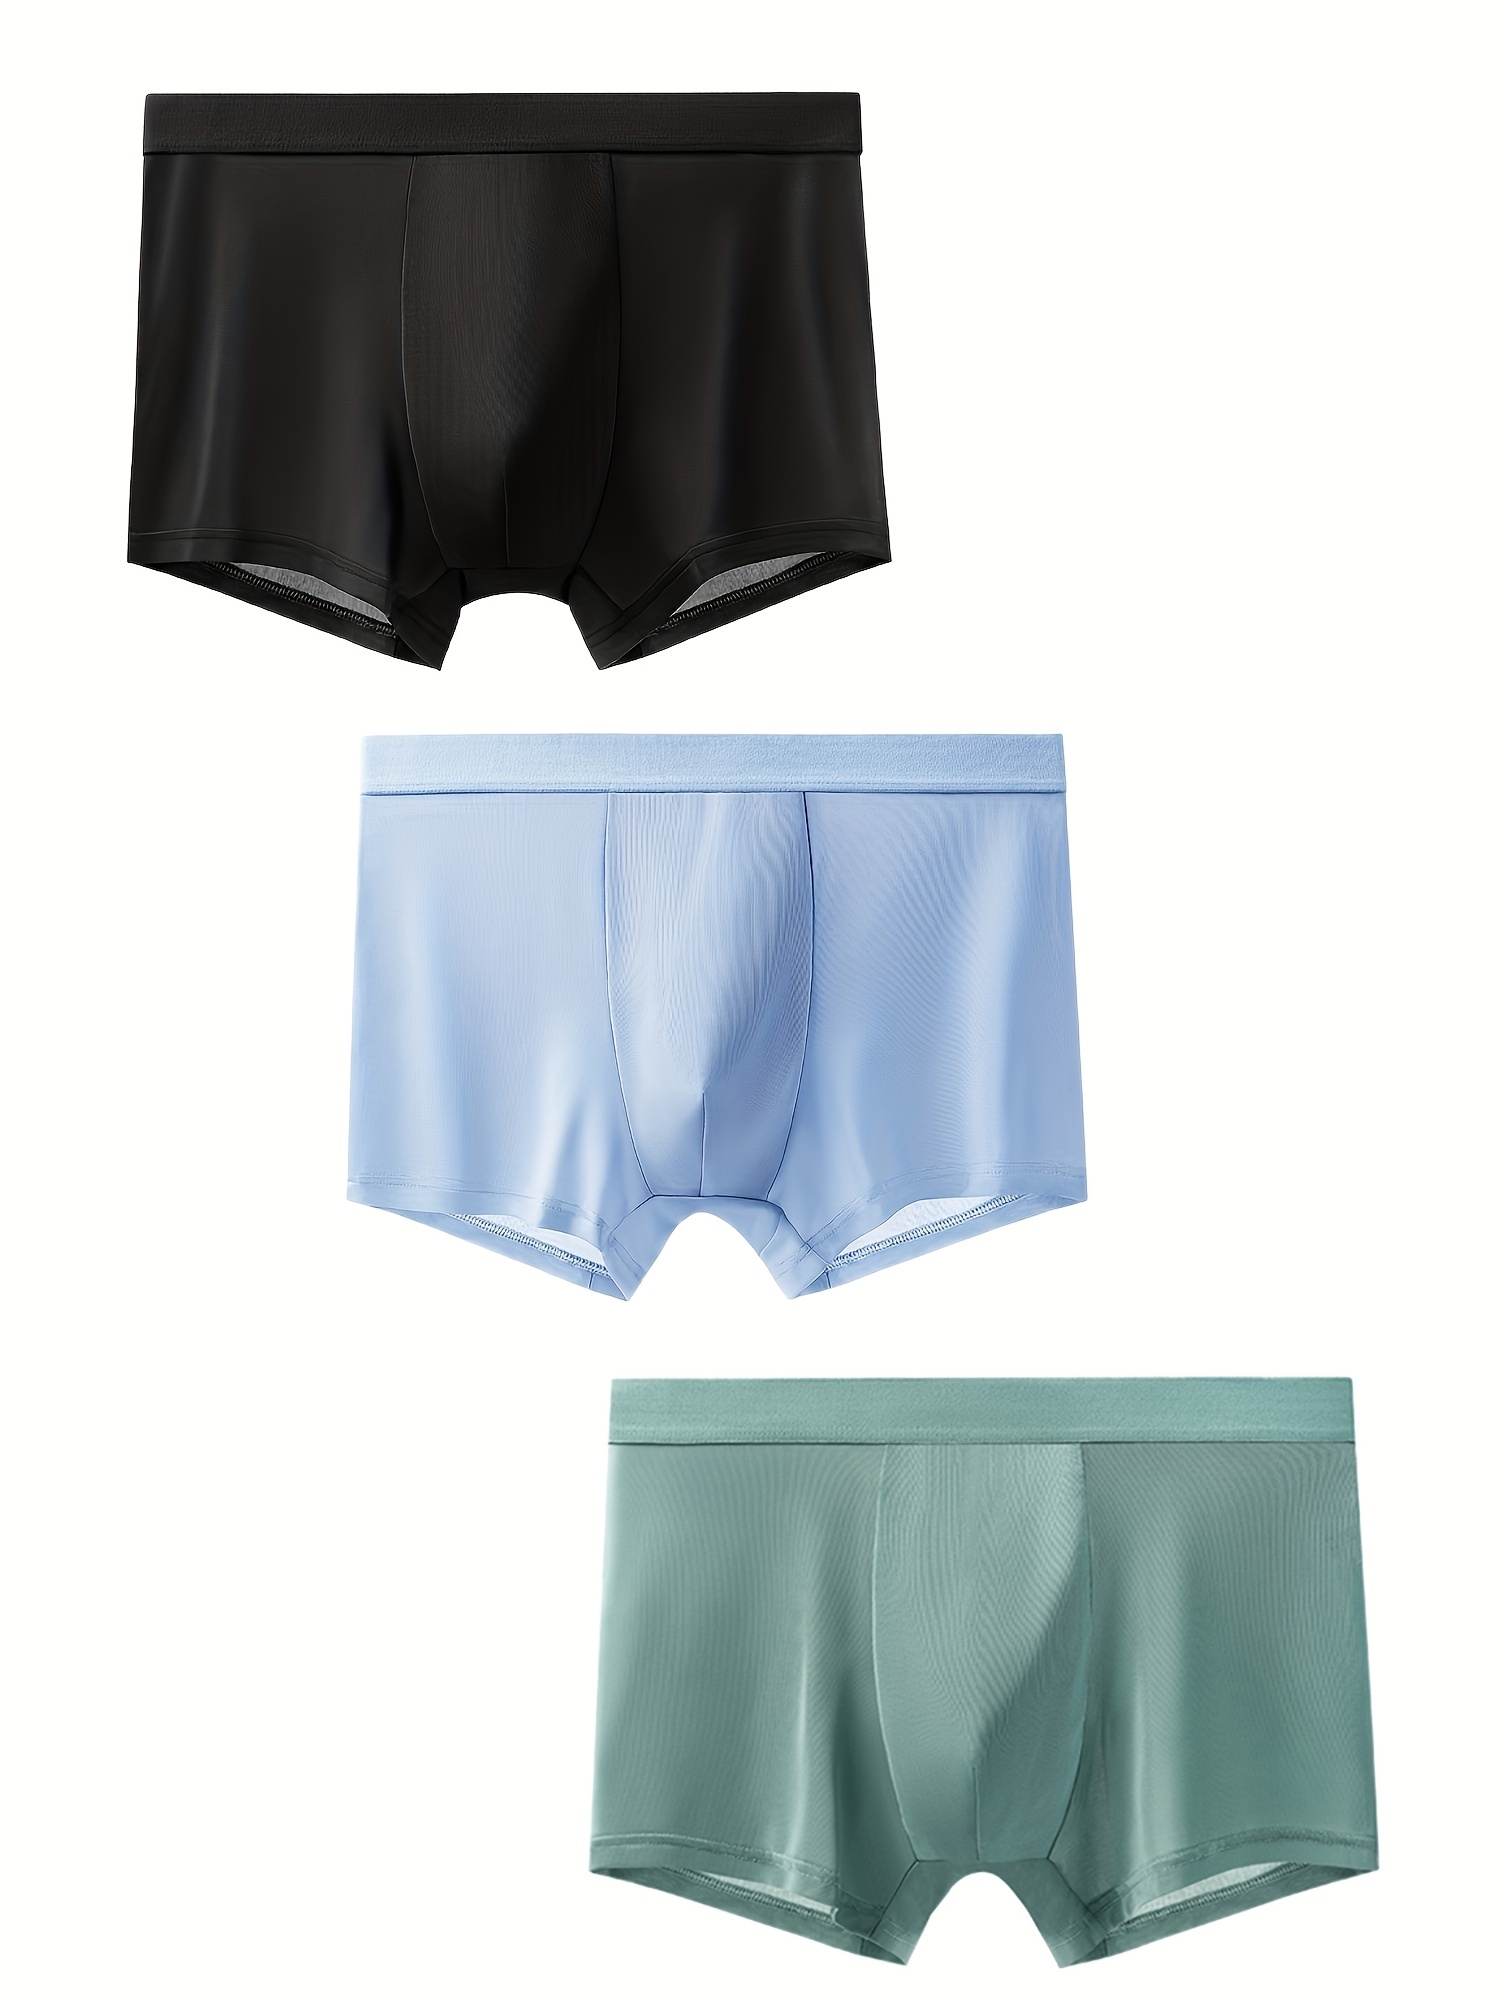 Ramses - Men's Sheer Mesh Boxers with Satin Trims and Sexy